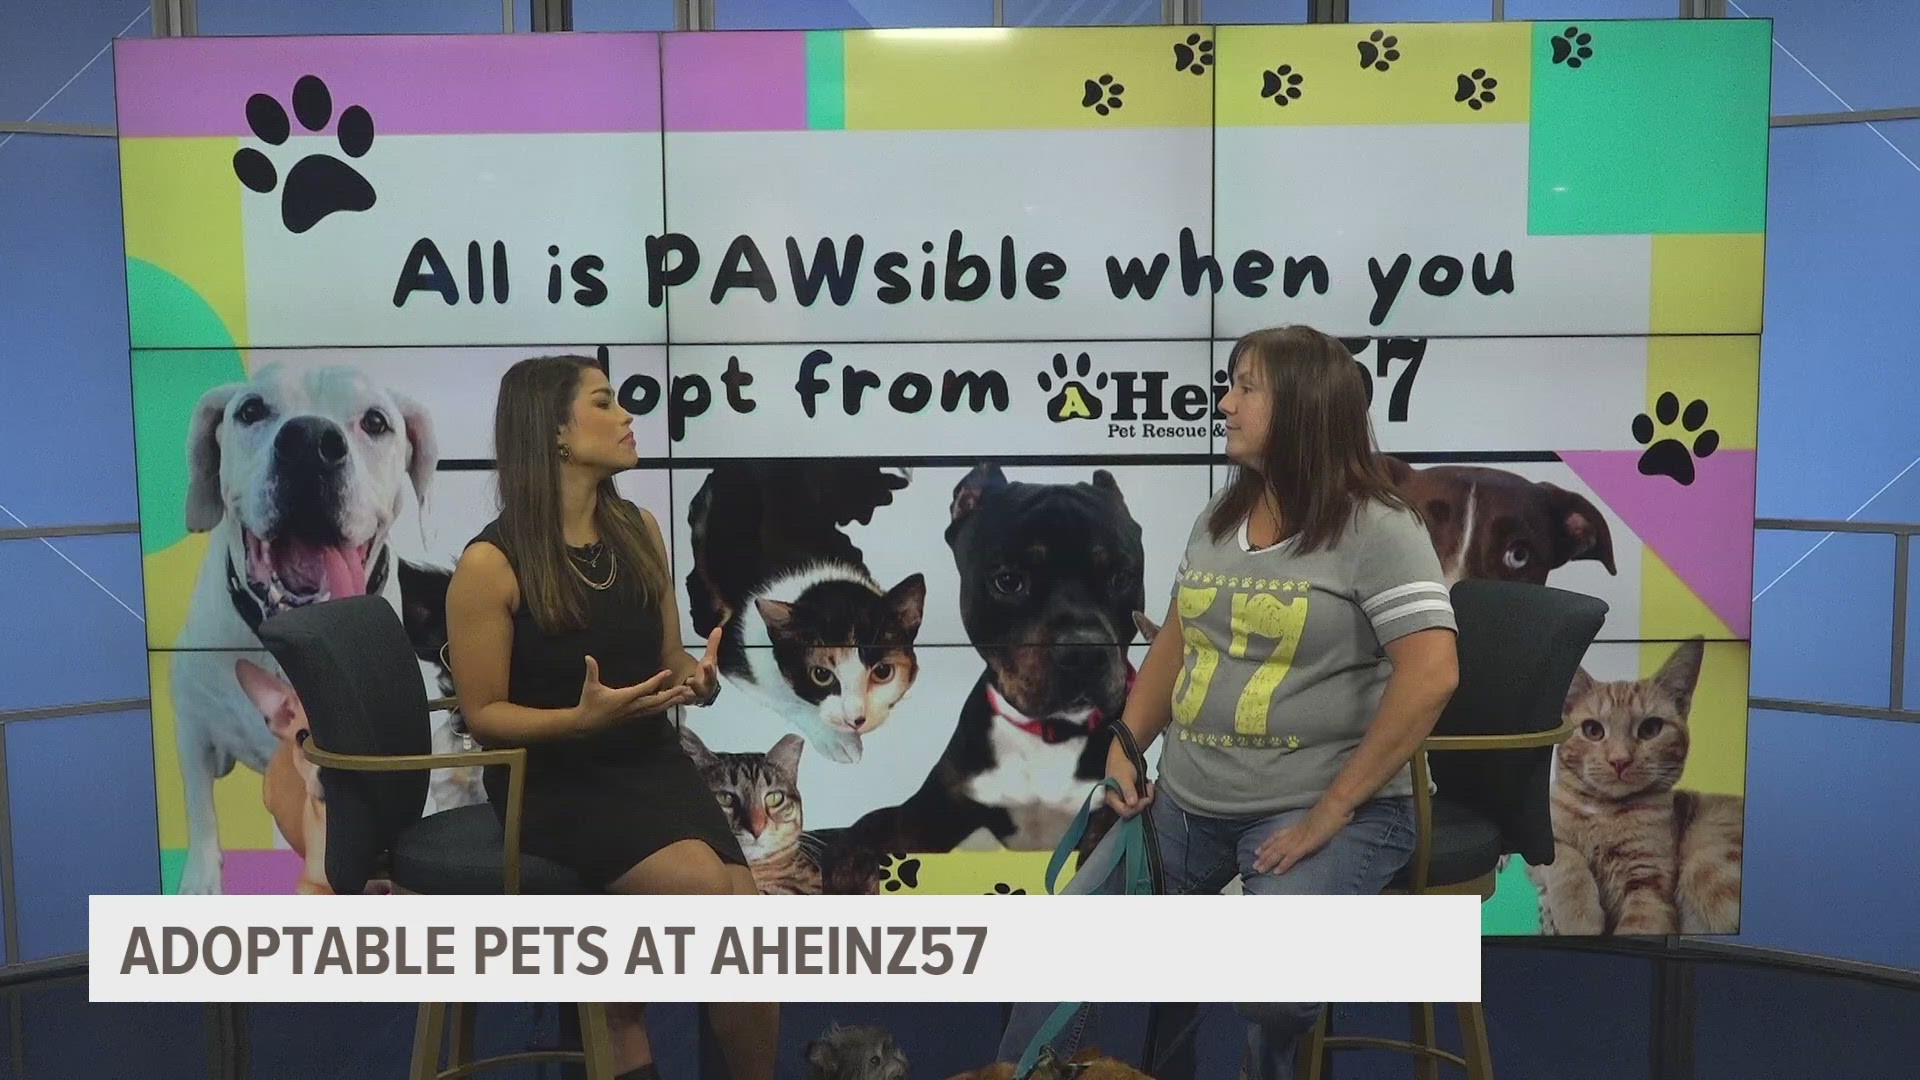 Lori McClur with AHeinz encourages people to adopt older pets and get involved by adopting or fostering an animal.